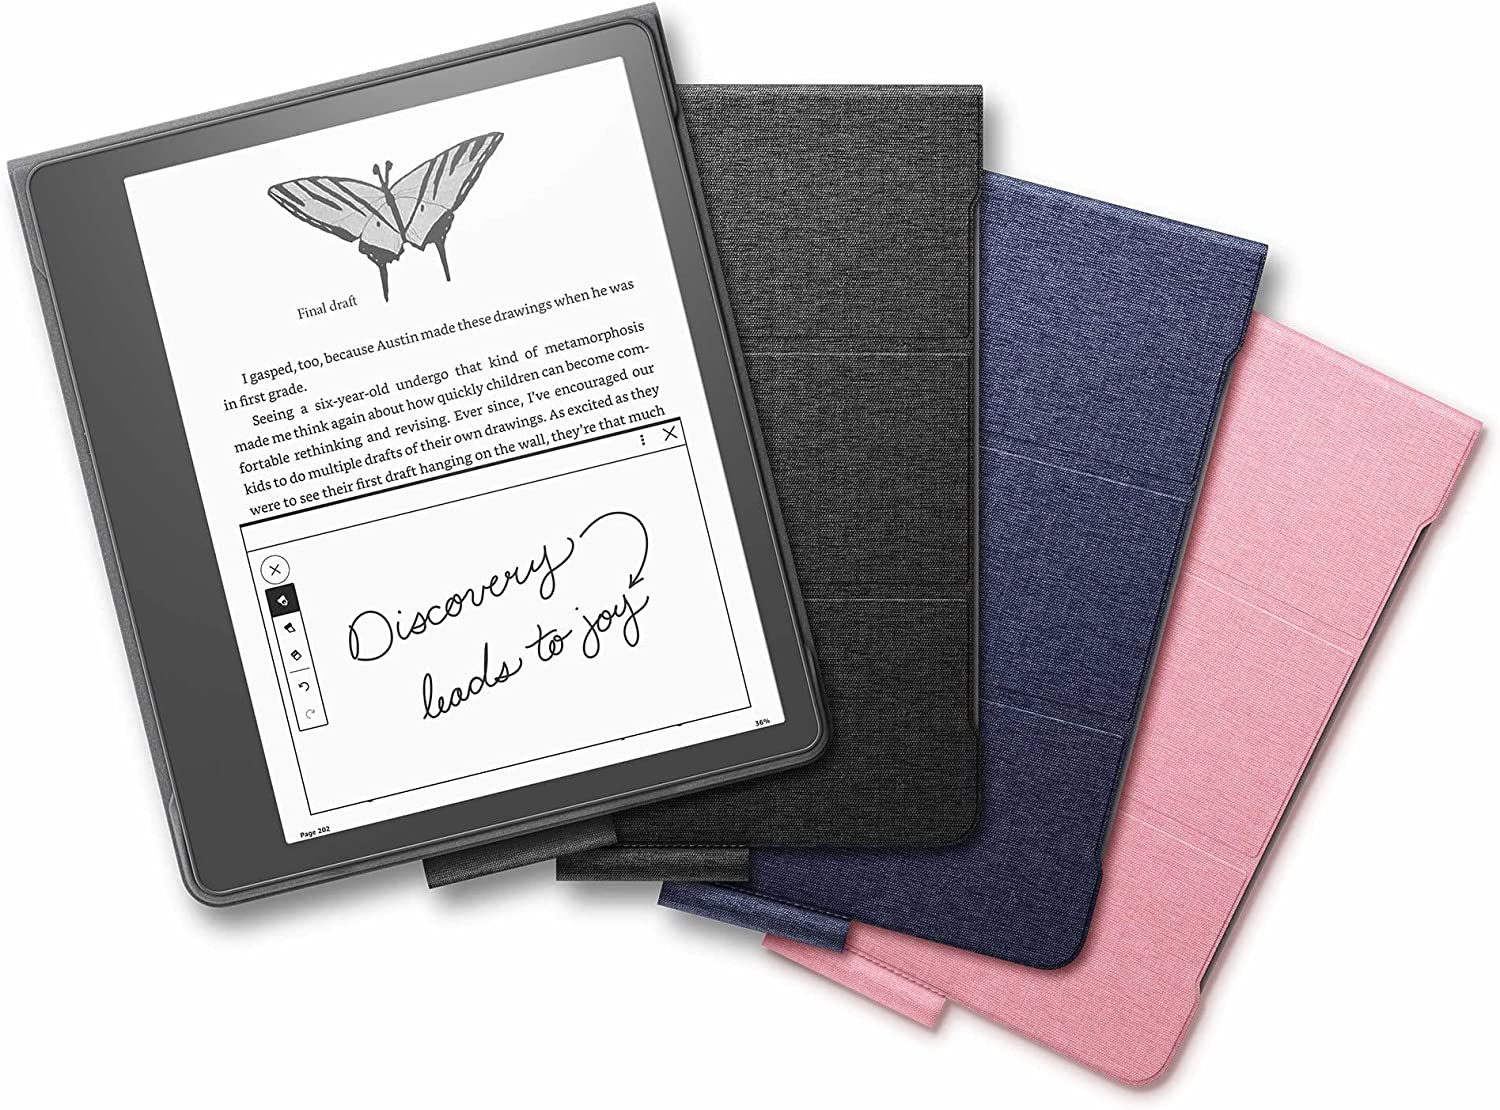 Kindle Scribe Essentials Bundle including Kindle Scribe (64 GB), Premium  Pen, Leather Folio Cover with Magnetic Attach - Black, and Power Adapter